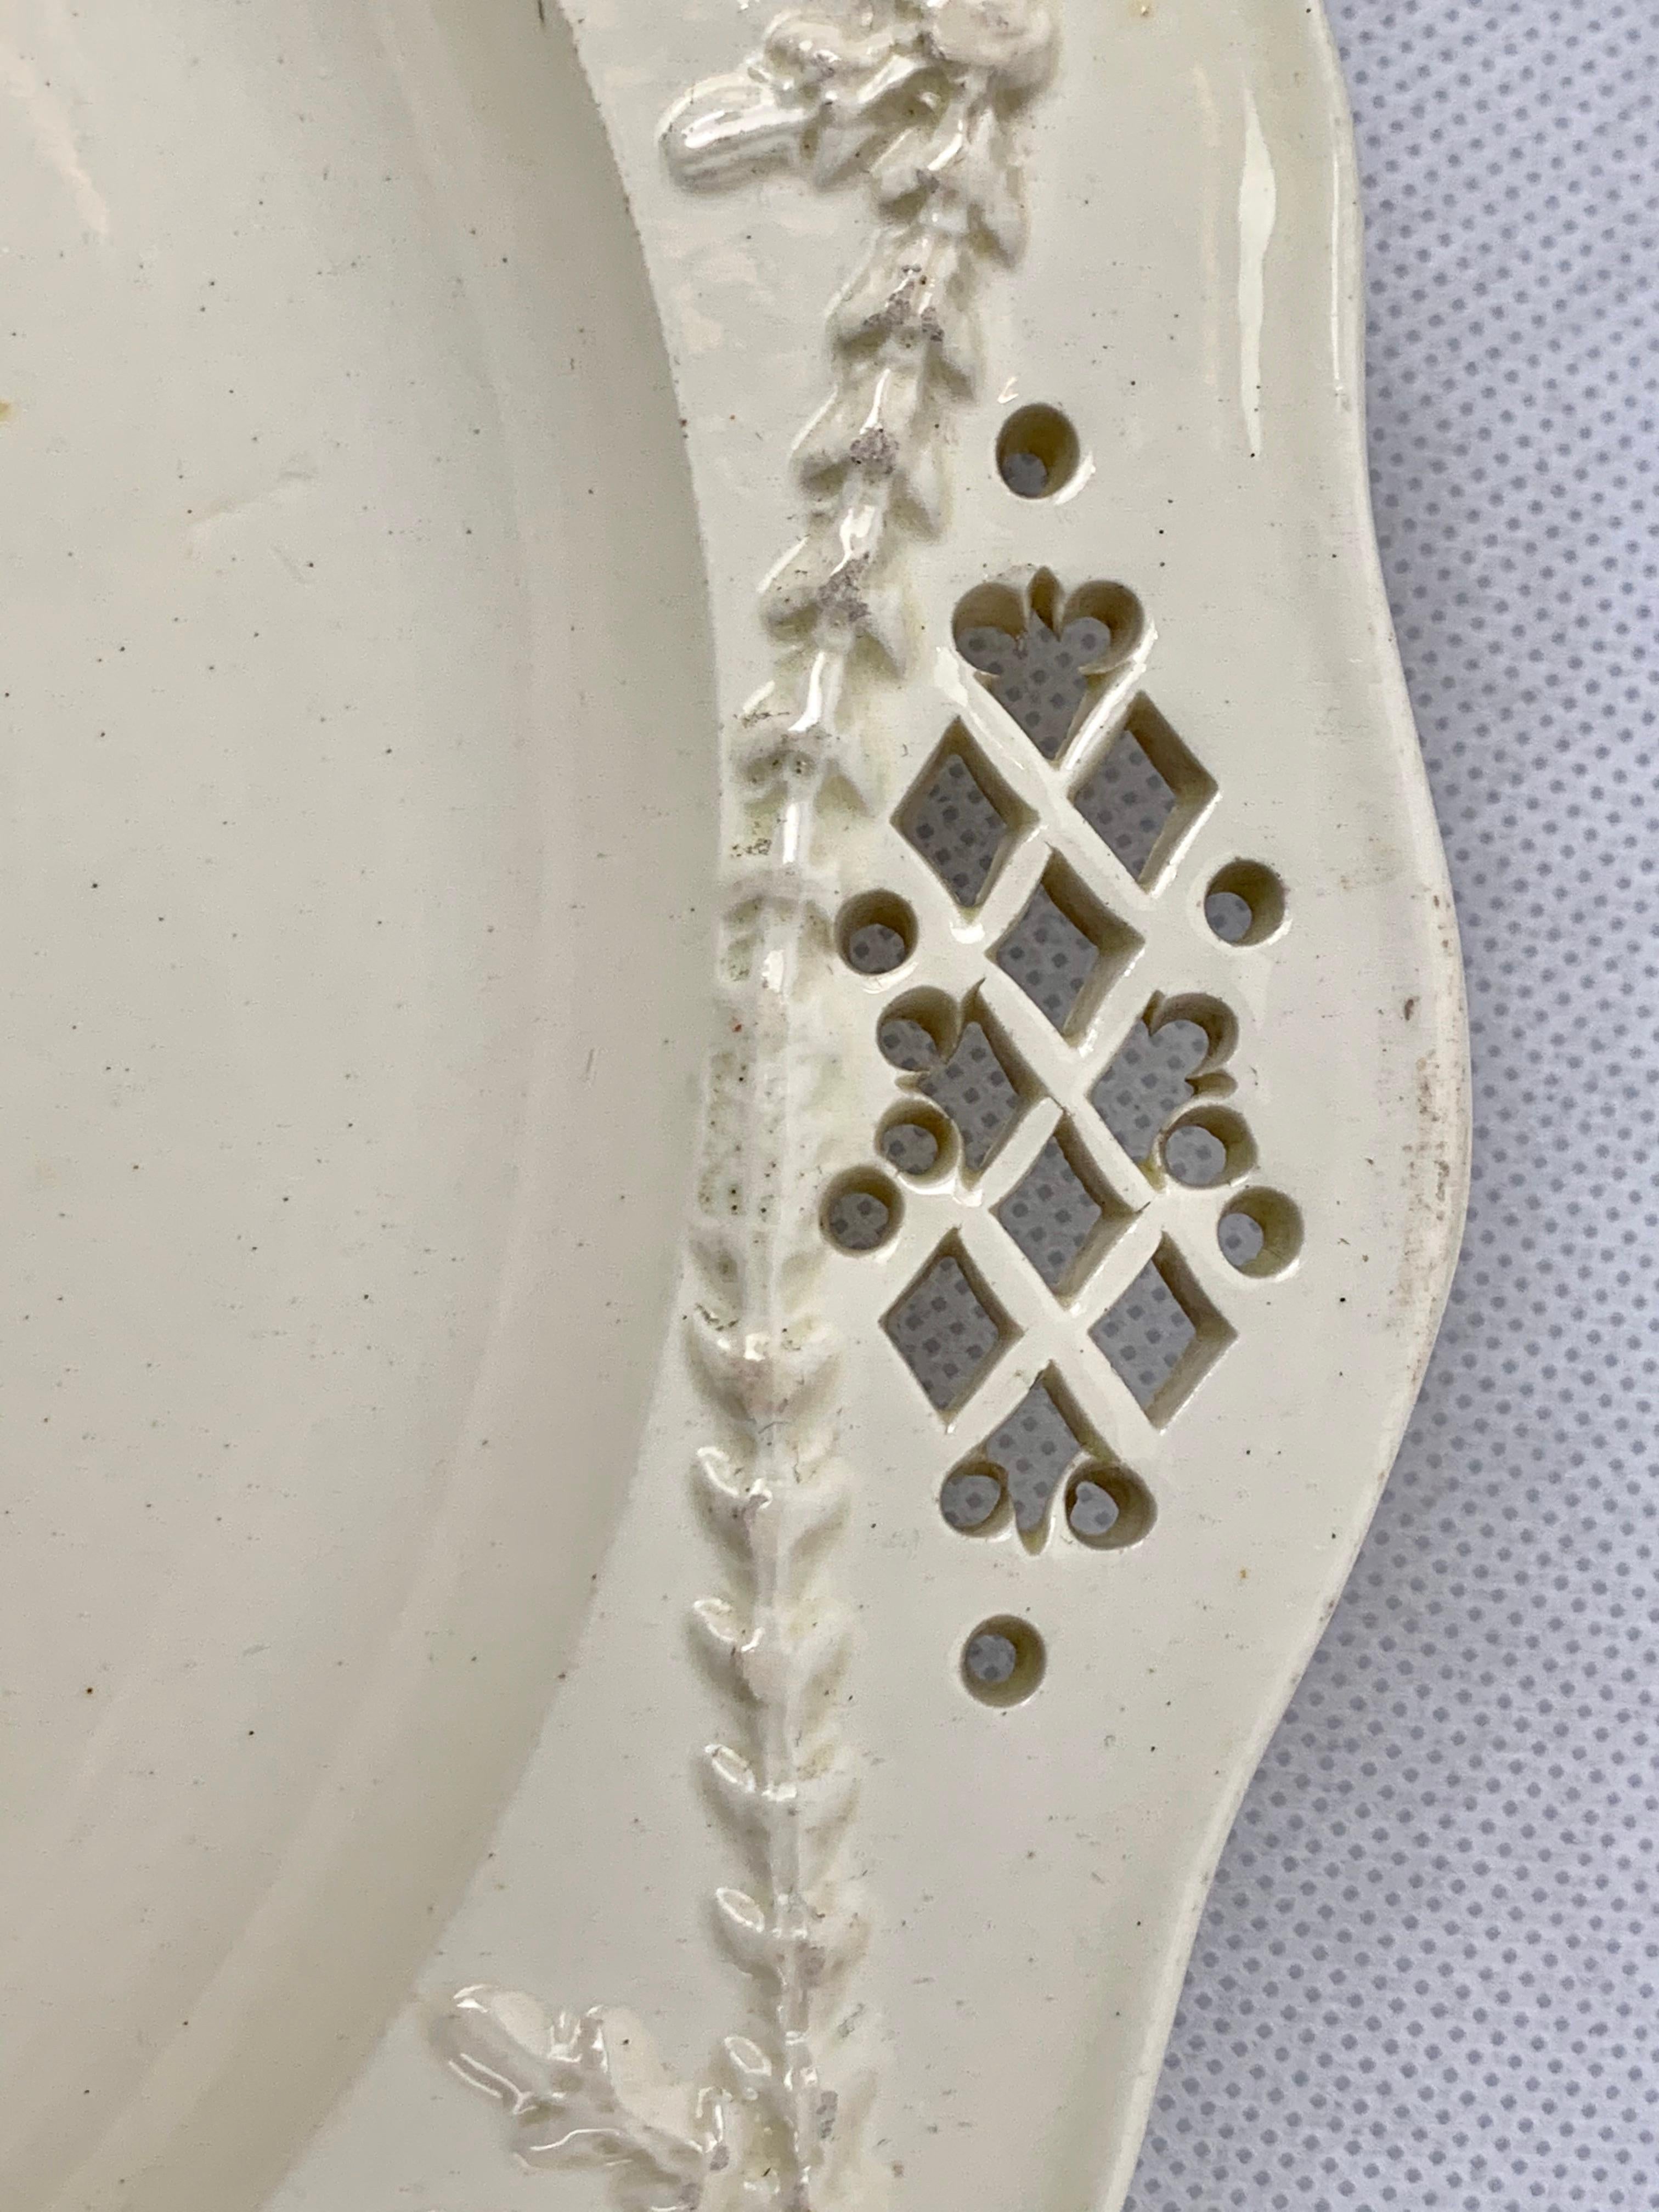 English Antique Reticulated Creamware Plate-England, Late 18th Century